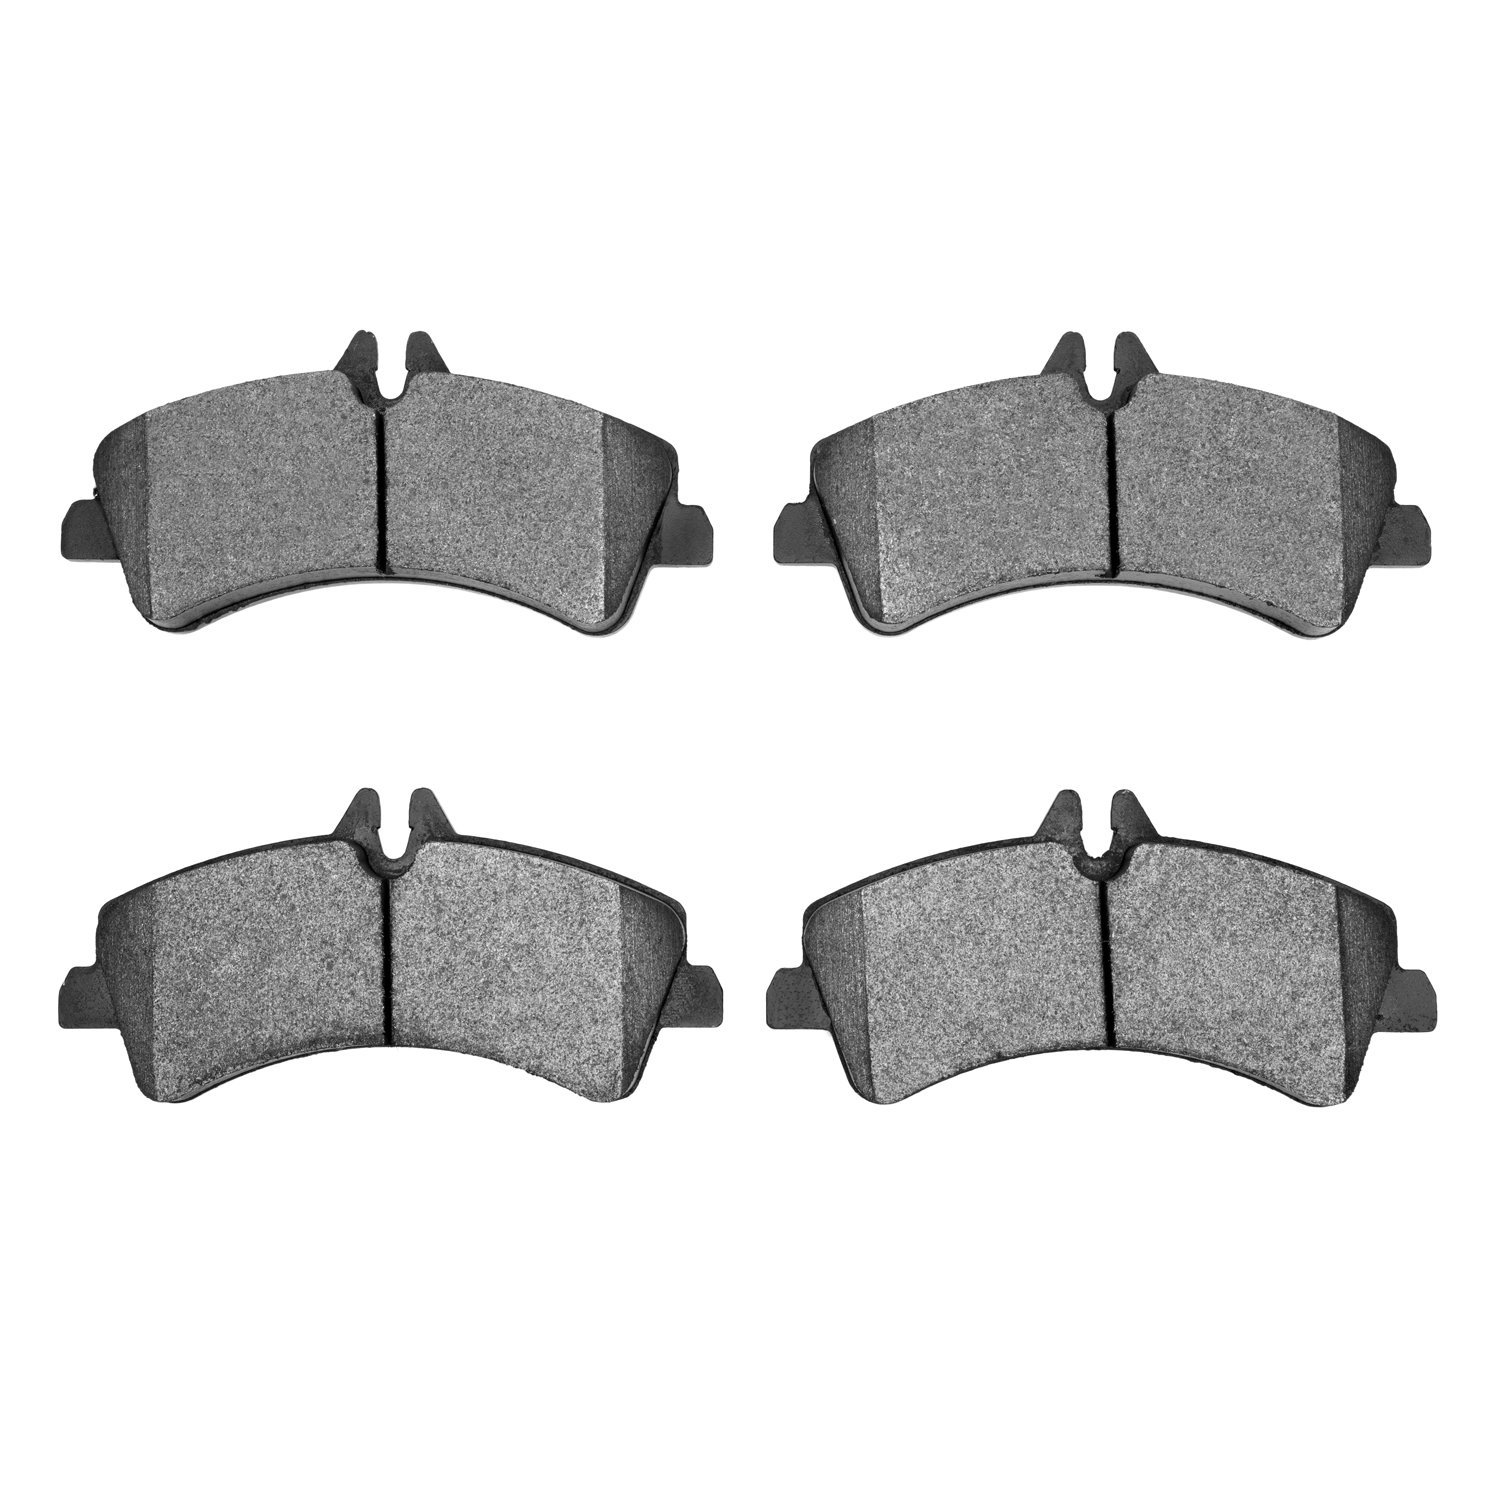 Optimum OE Brake Pads, 2006-2018 Fits Multiple Makes/Models, Position: Rear Right